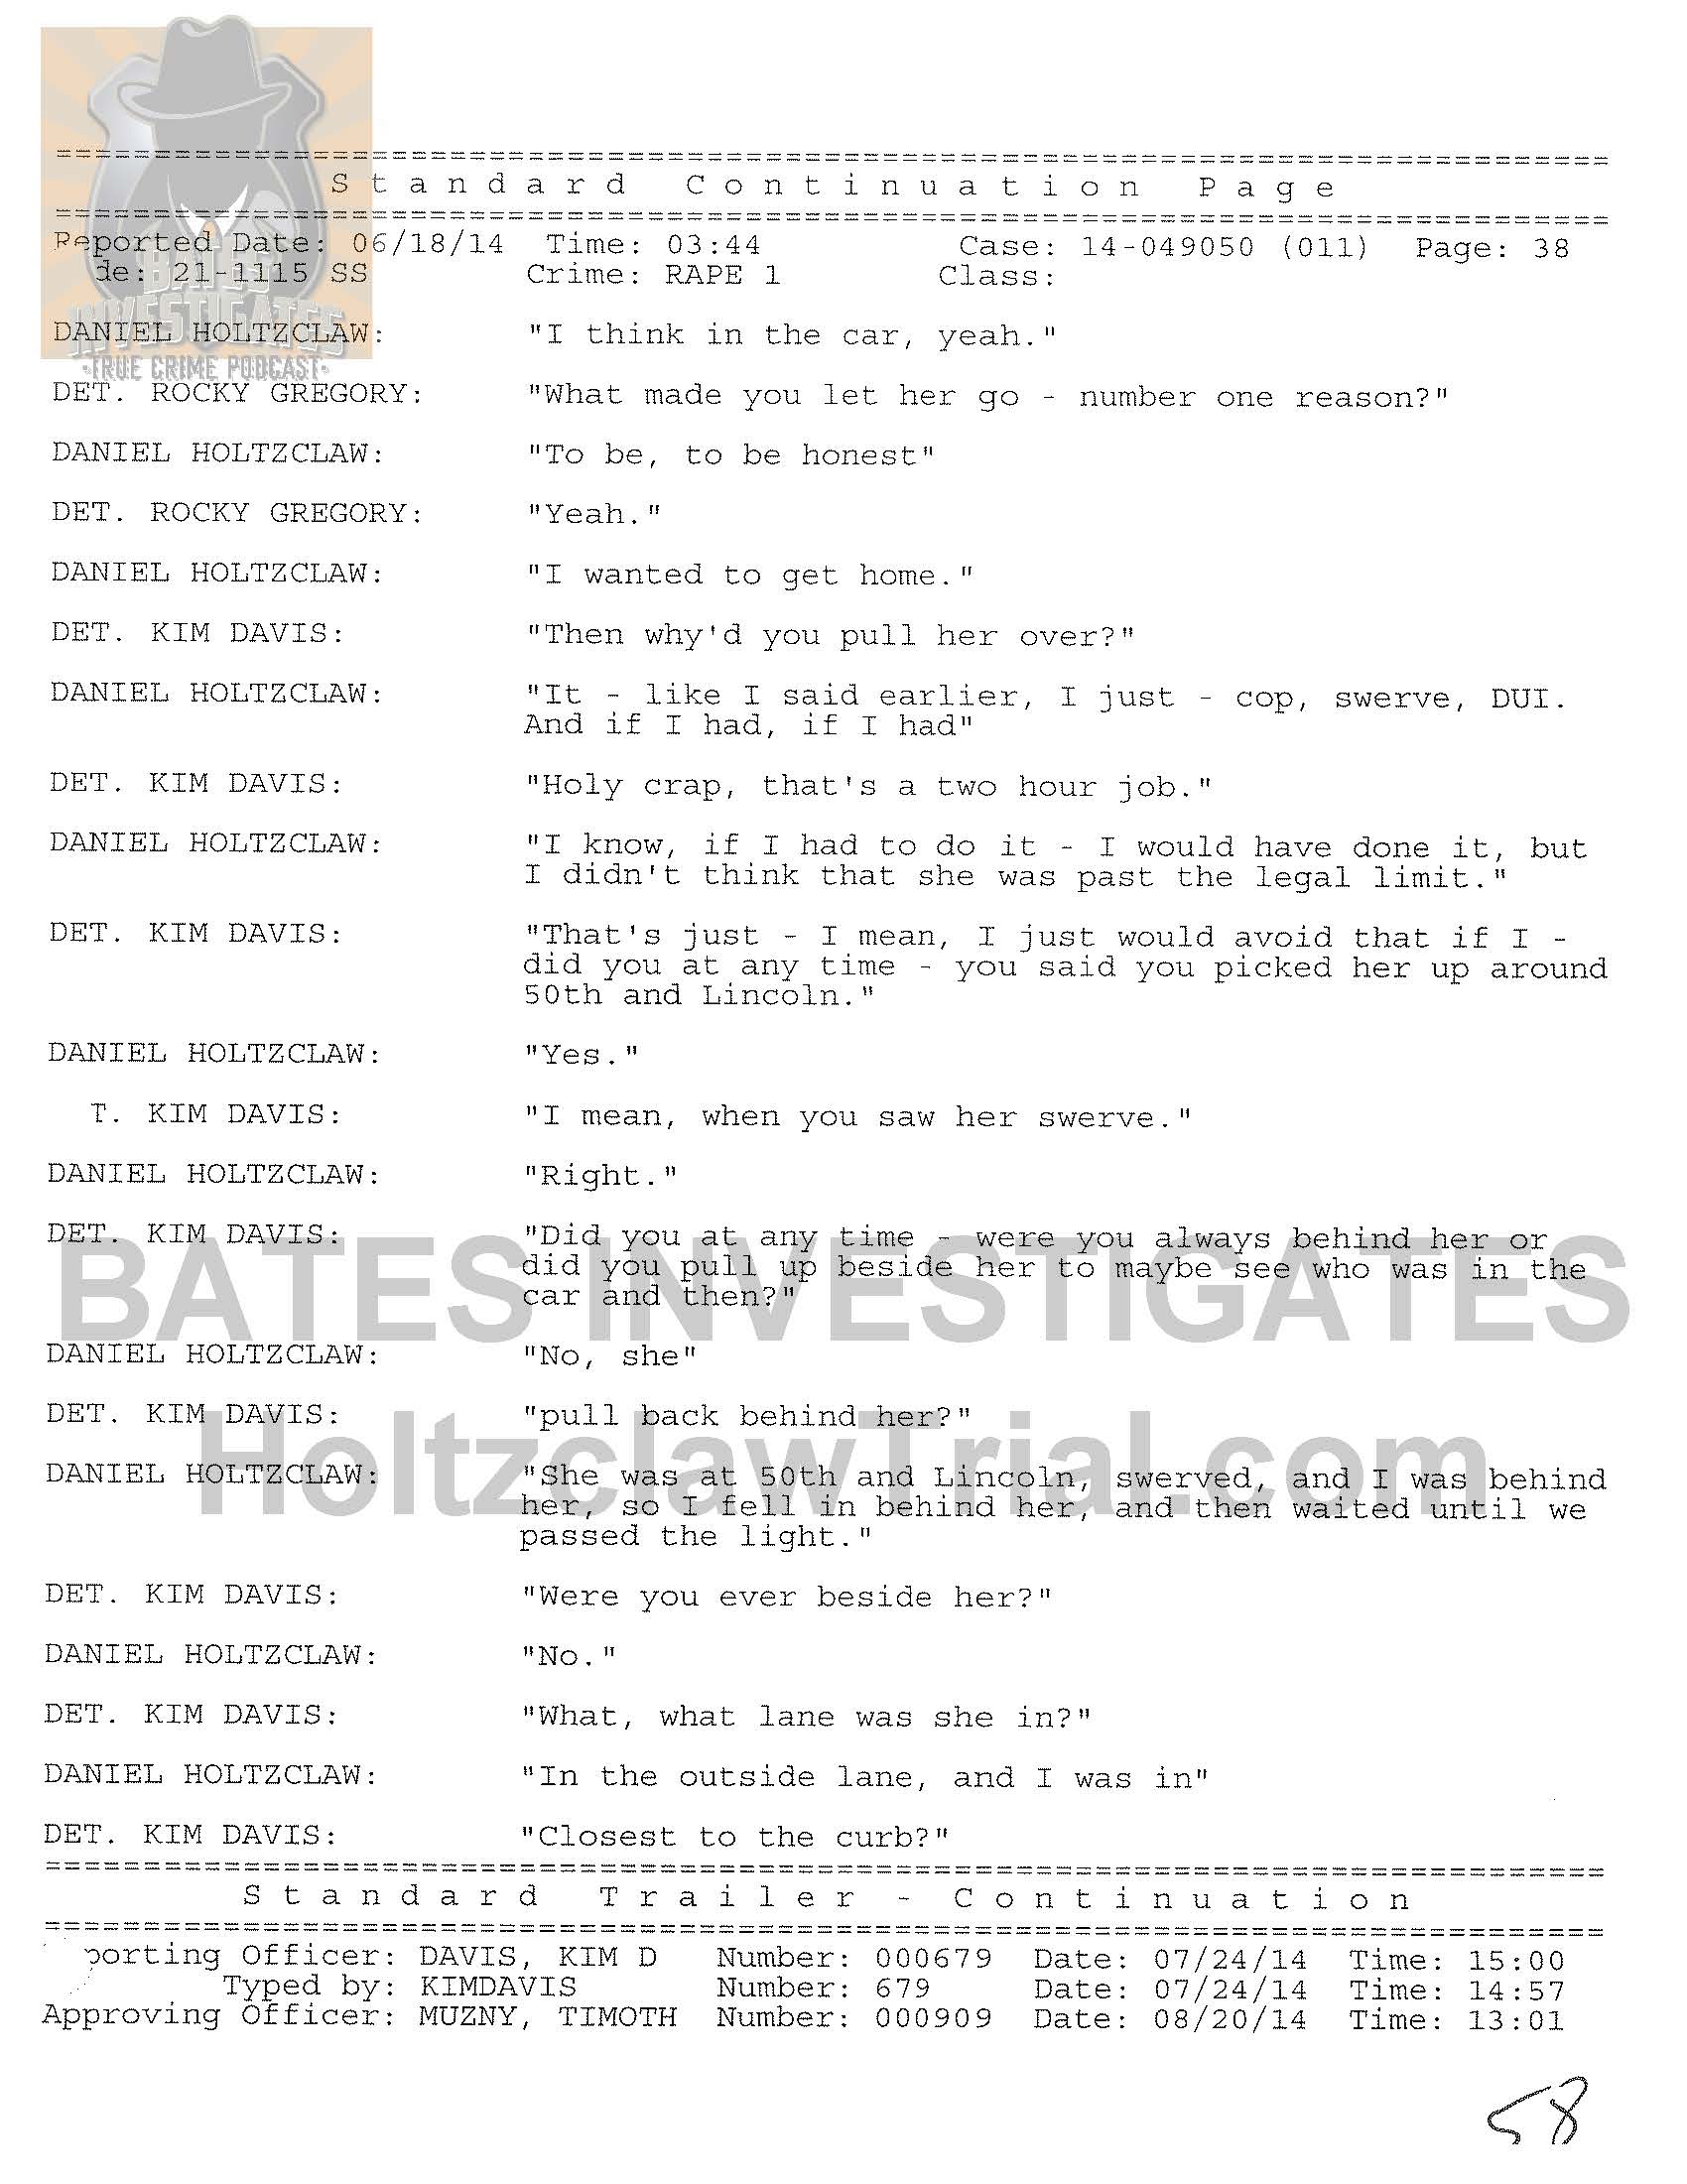 Holtzclaw Interrogation Transcript - Ep02 Redacted_Page_38.jpg